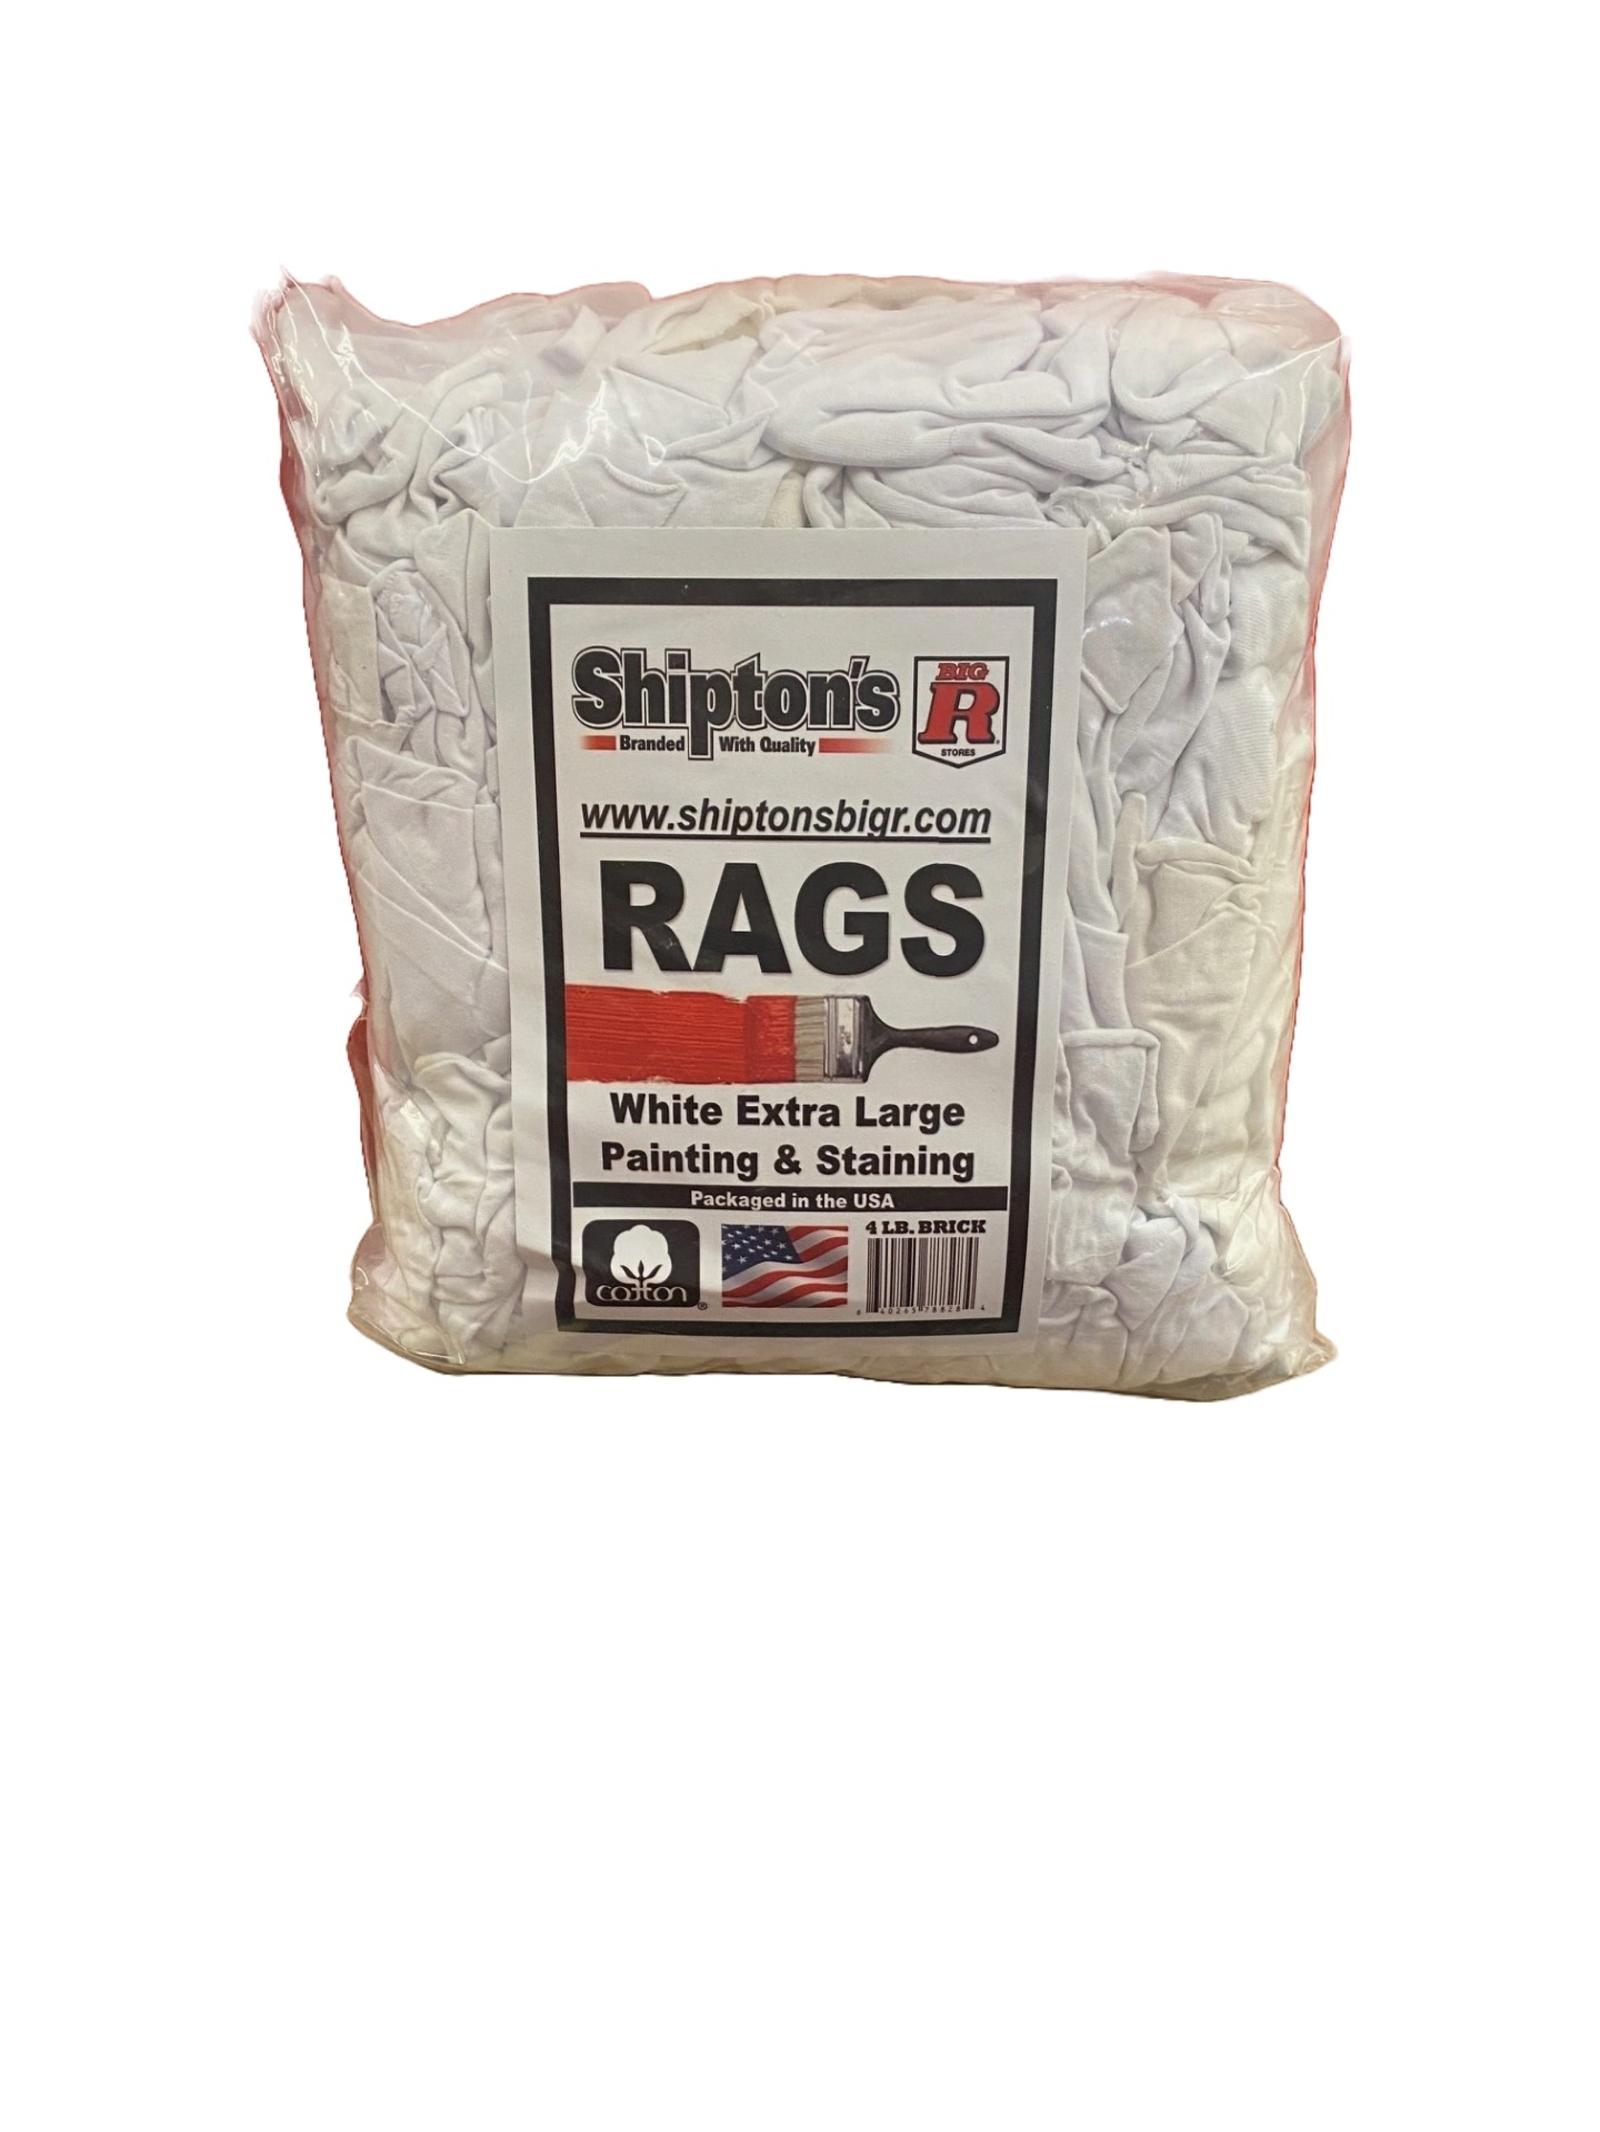 Shipton's Big R Painting and Staining Rags 4 lb Brick Front view